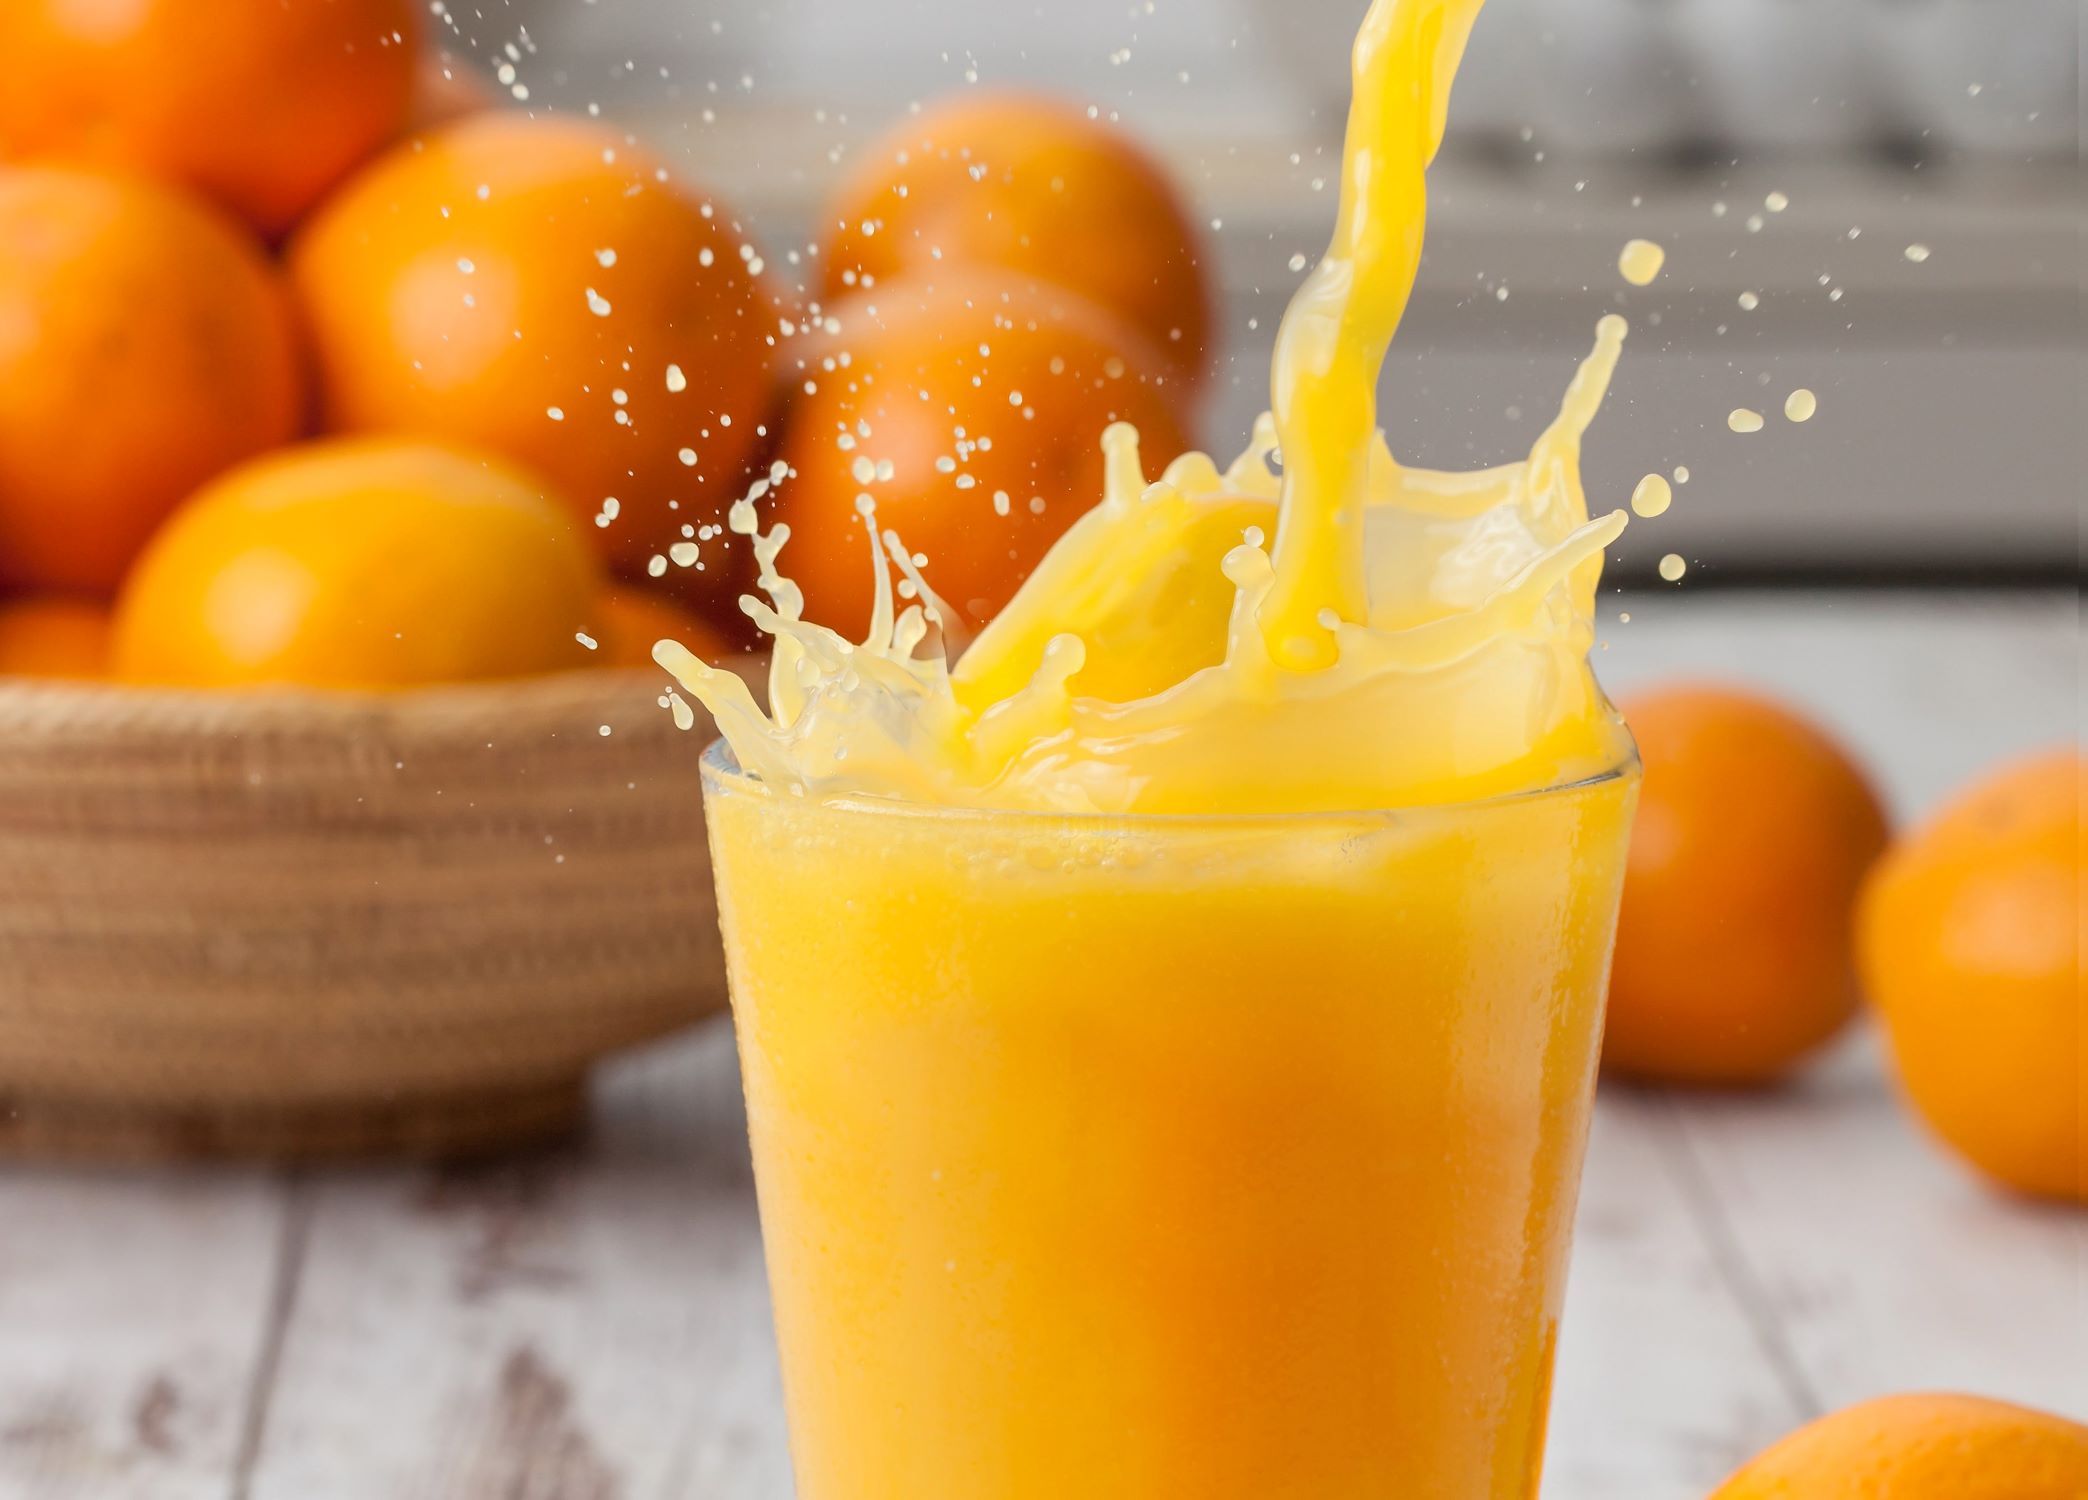 How Much Vitamin C In A Glass Of Orange Juice